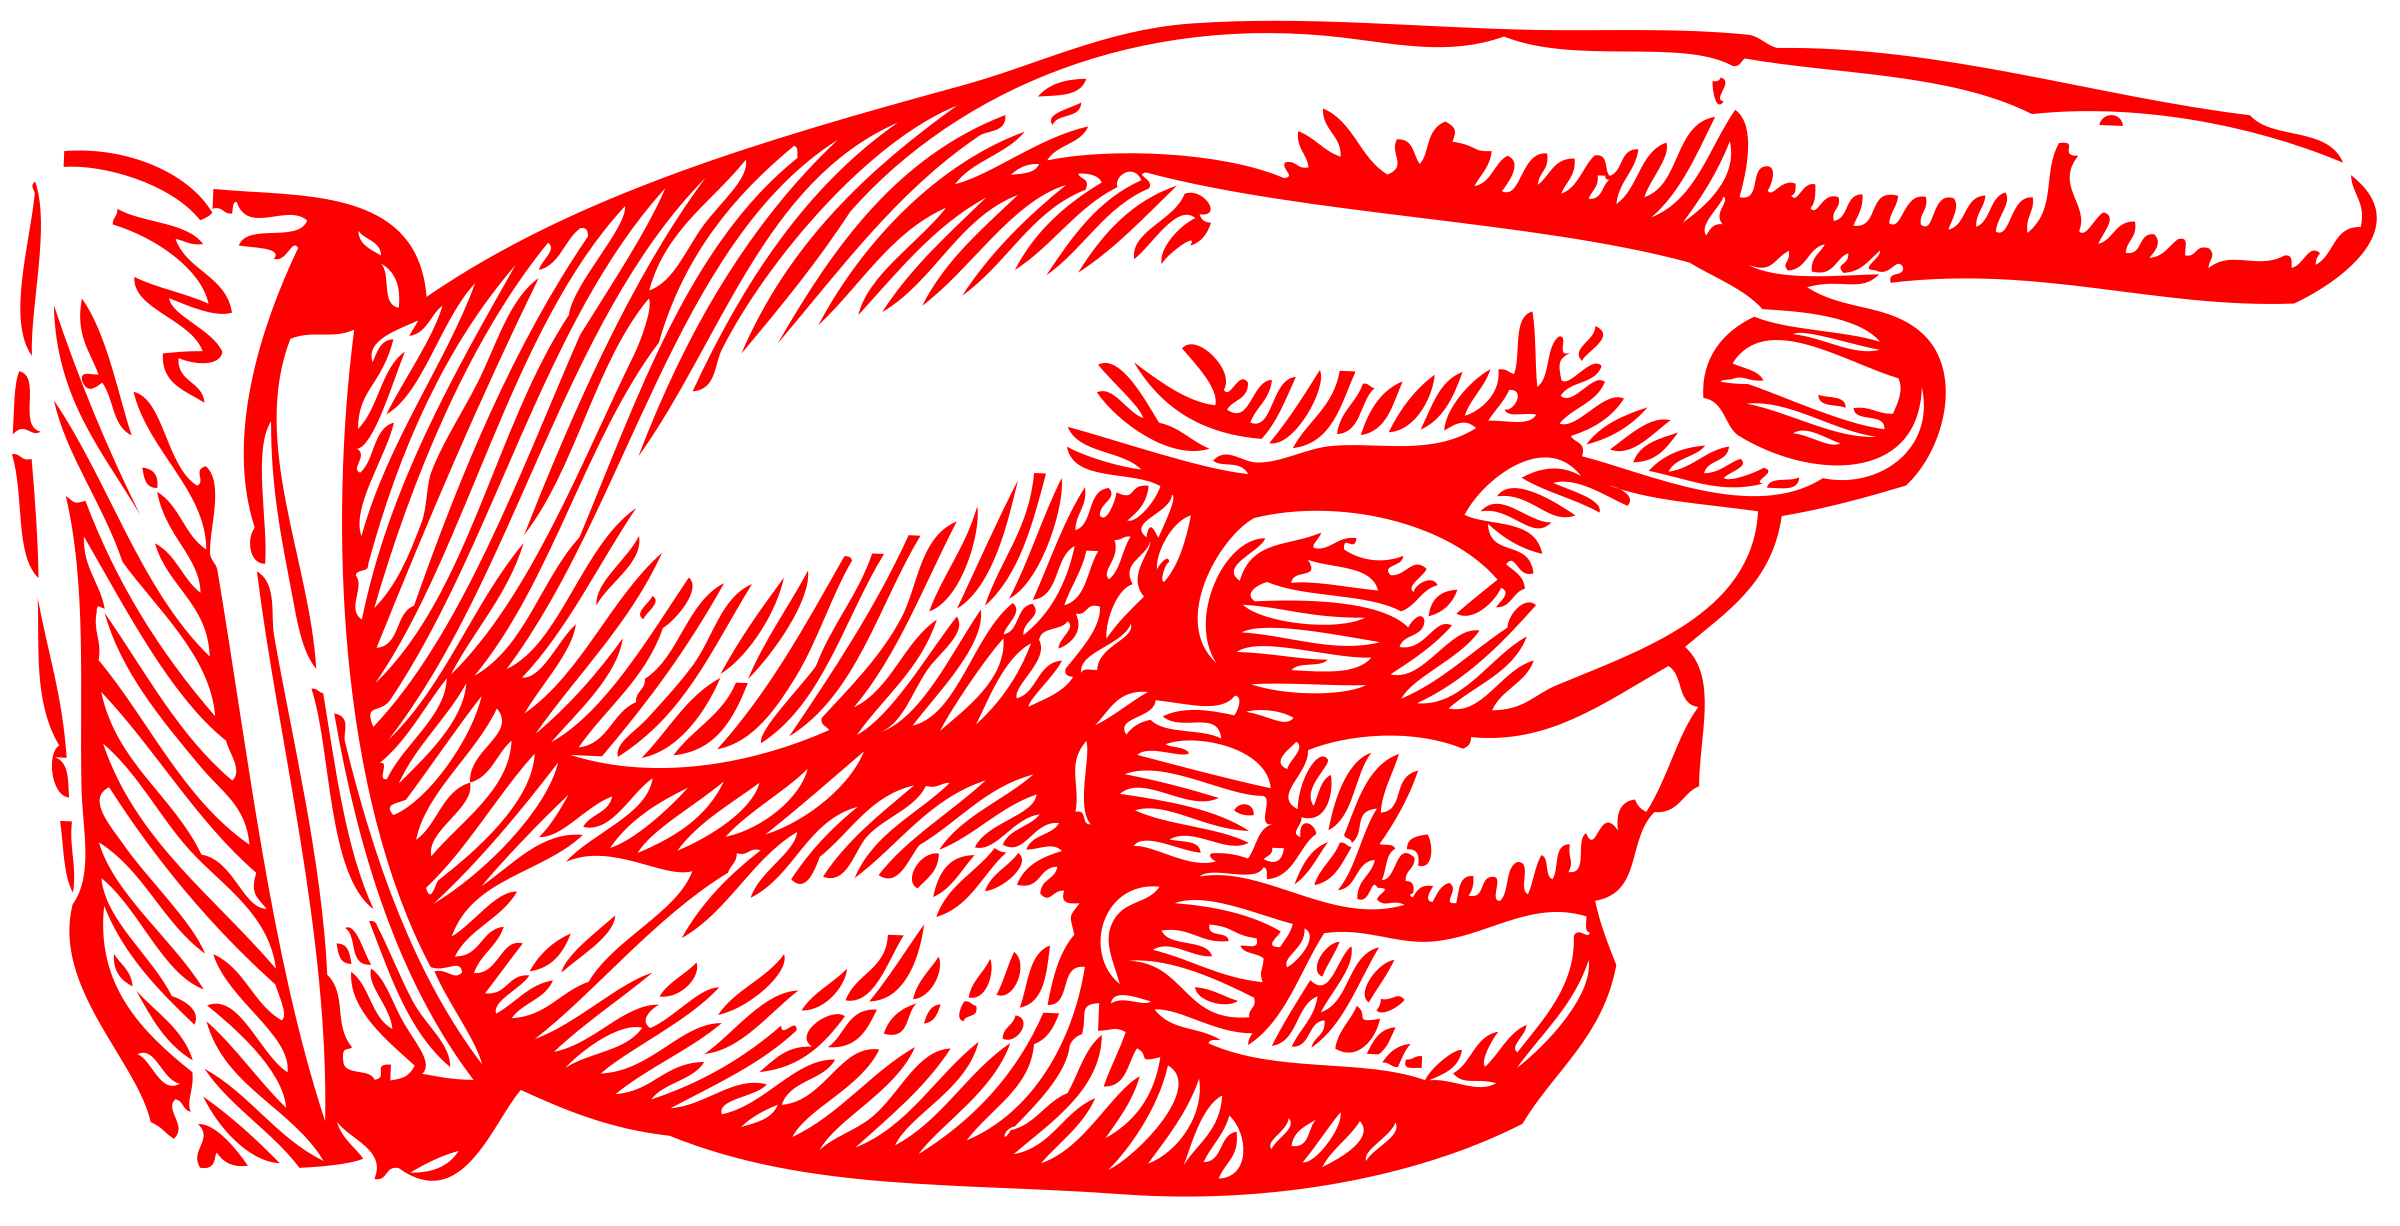 pointing clipart hand symbol